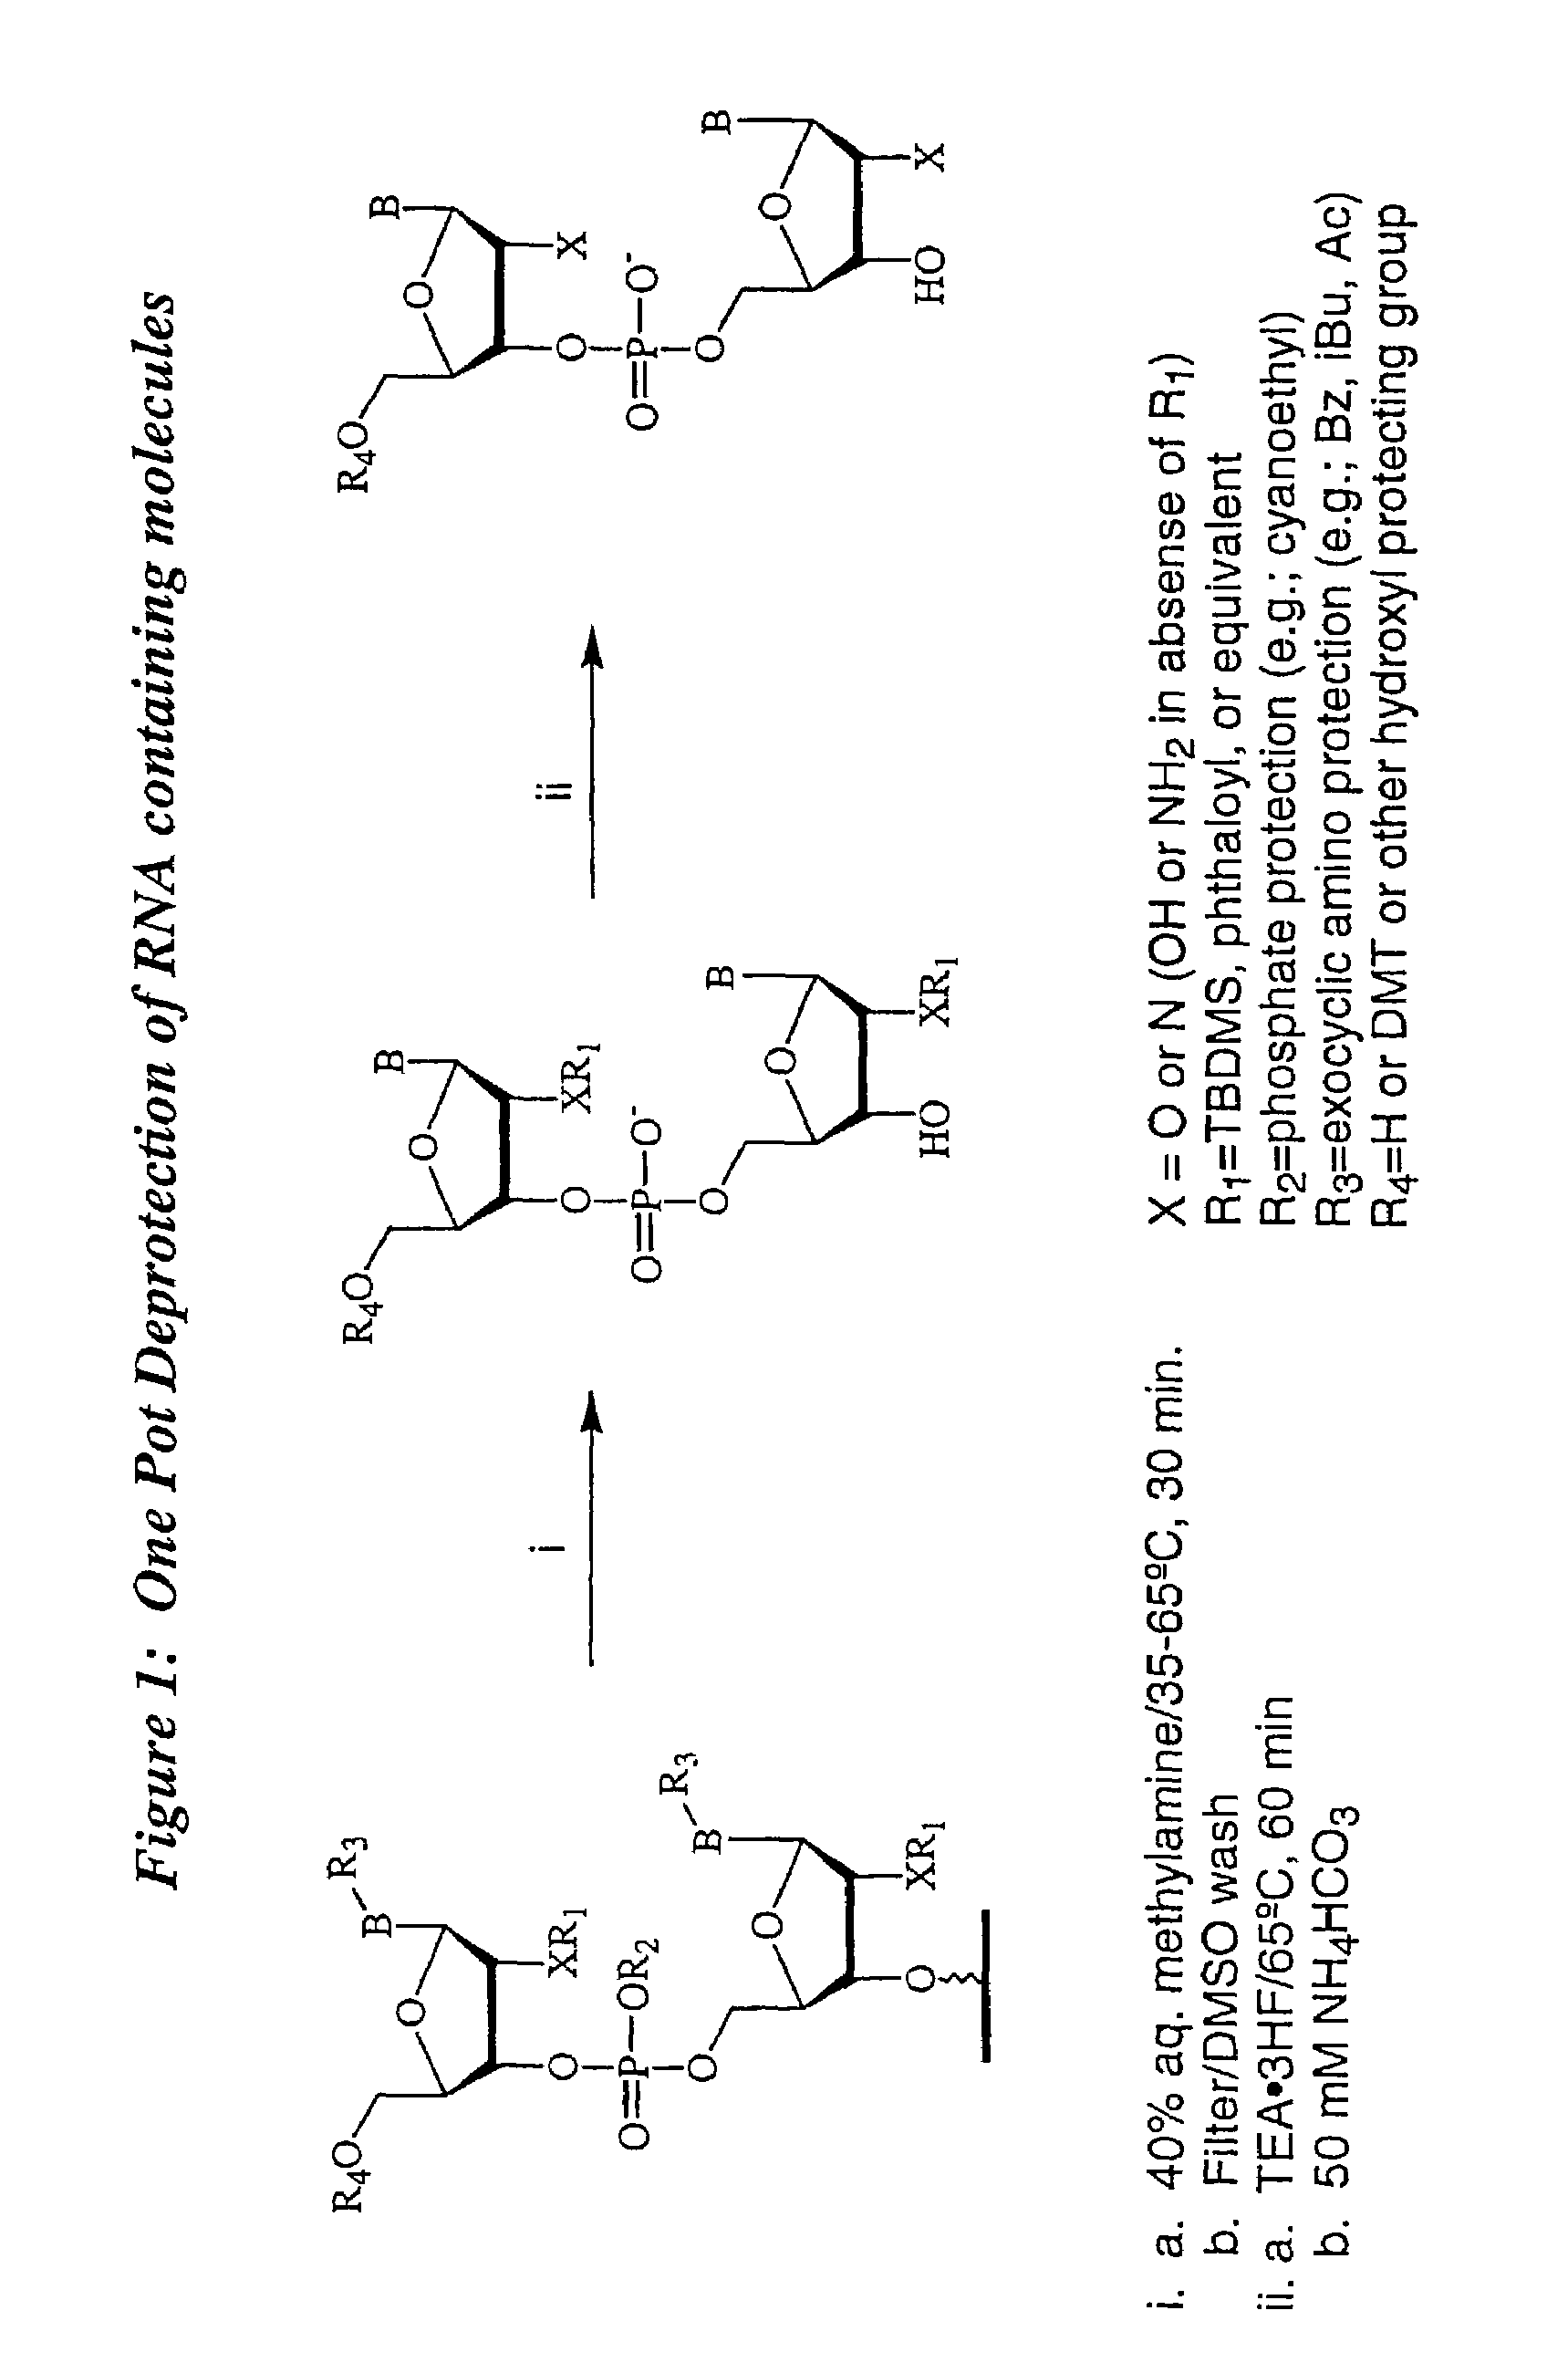 Deprotection and purification of oligonucleotides and their derivatives